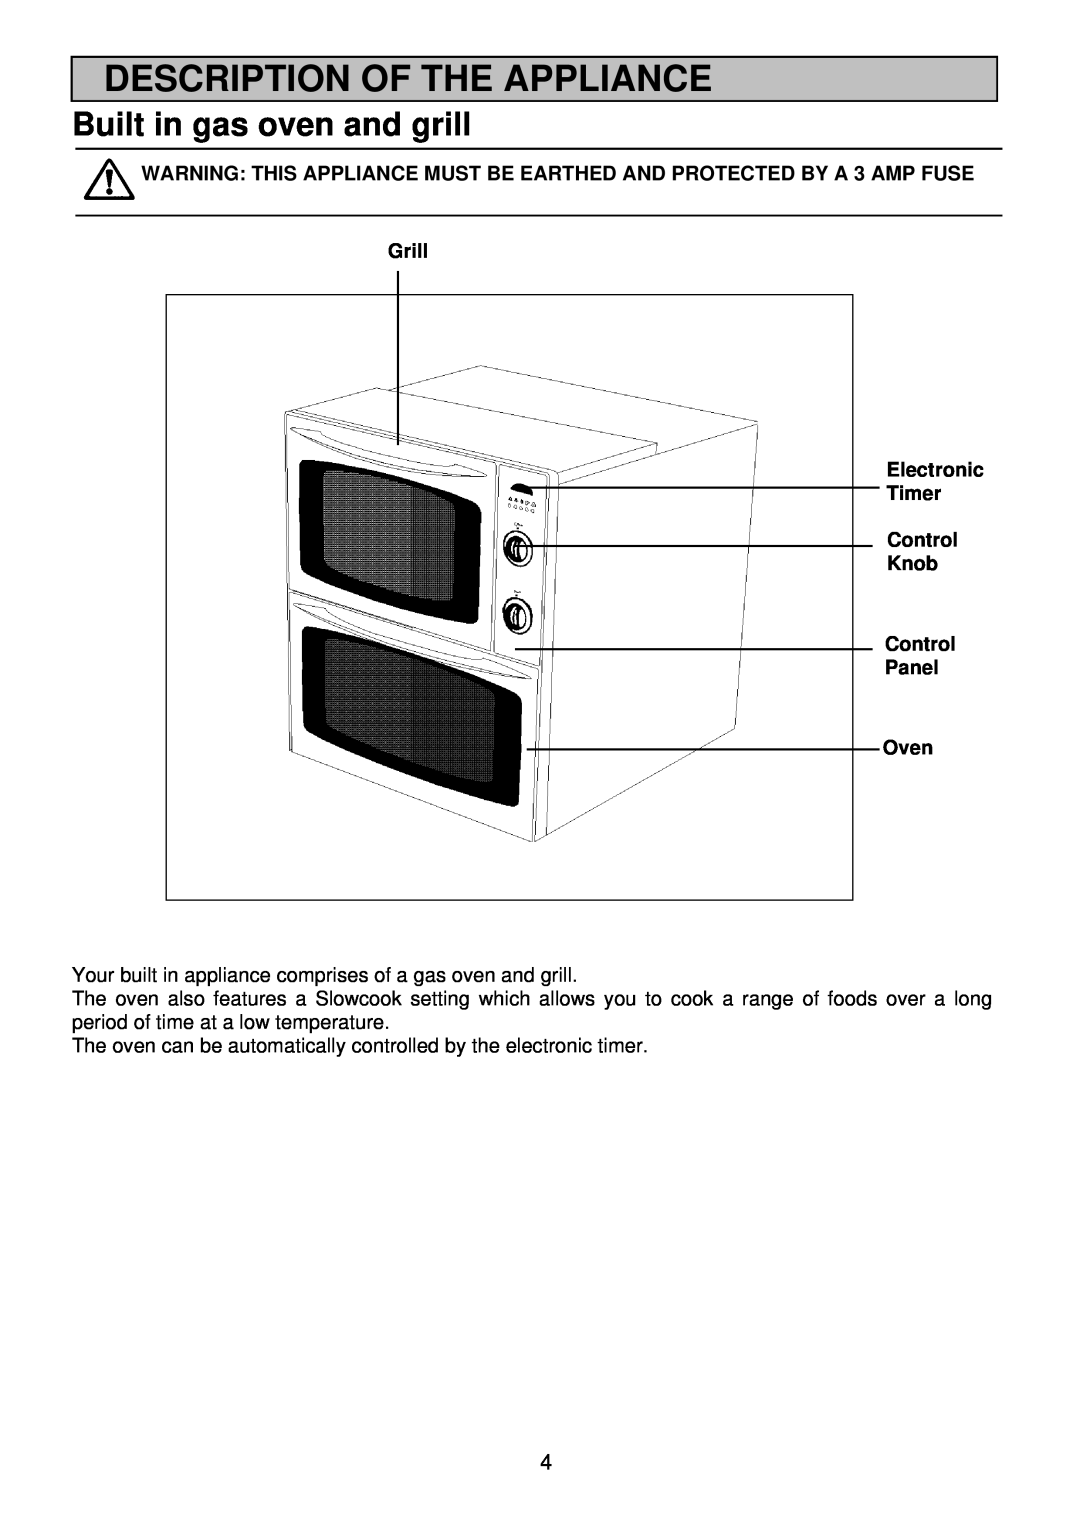 Electrolux EDB 872 manual Description Of The Appliance, Built in gas oven and grill 